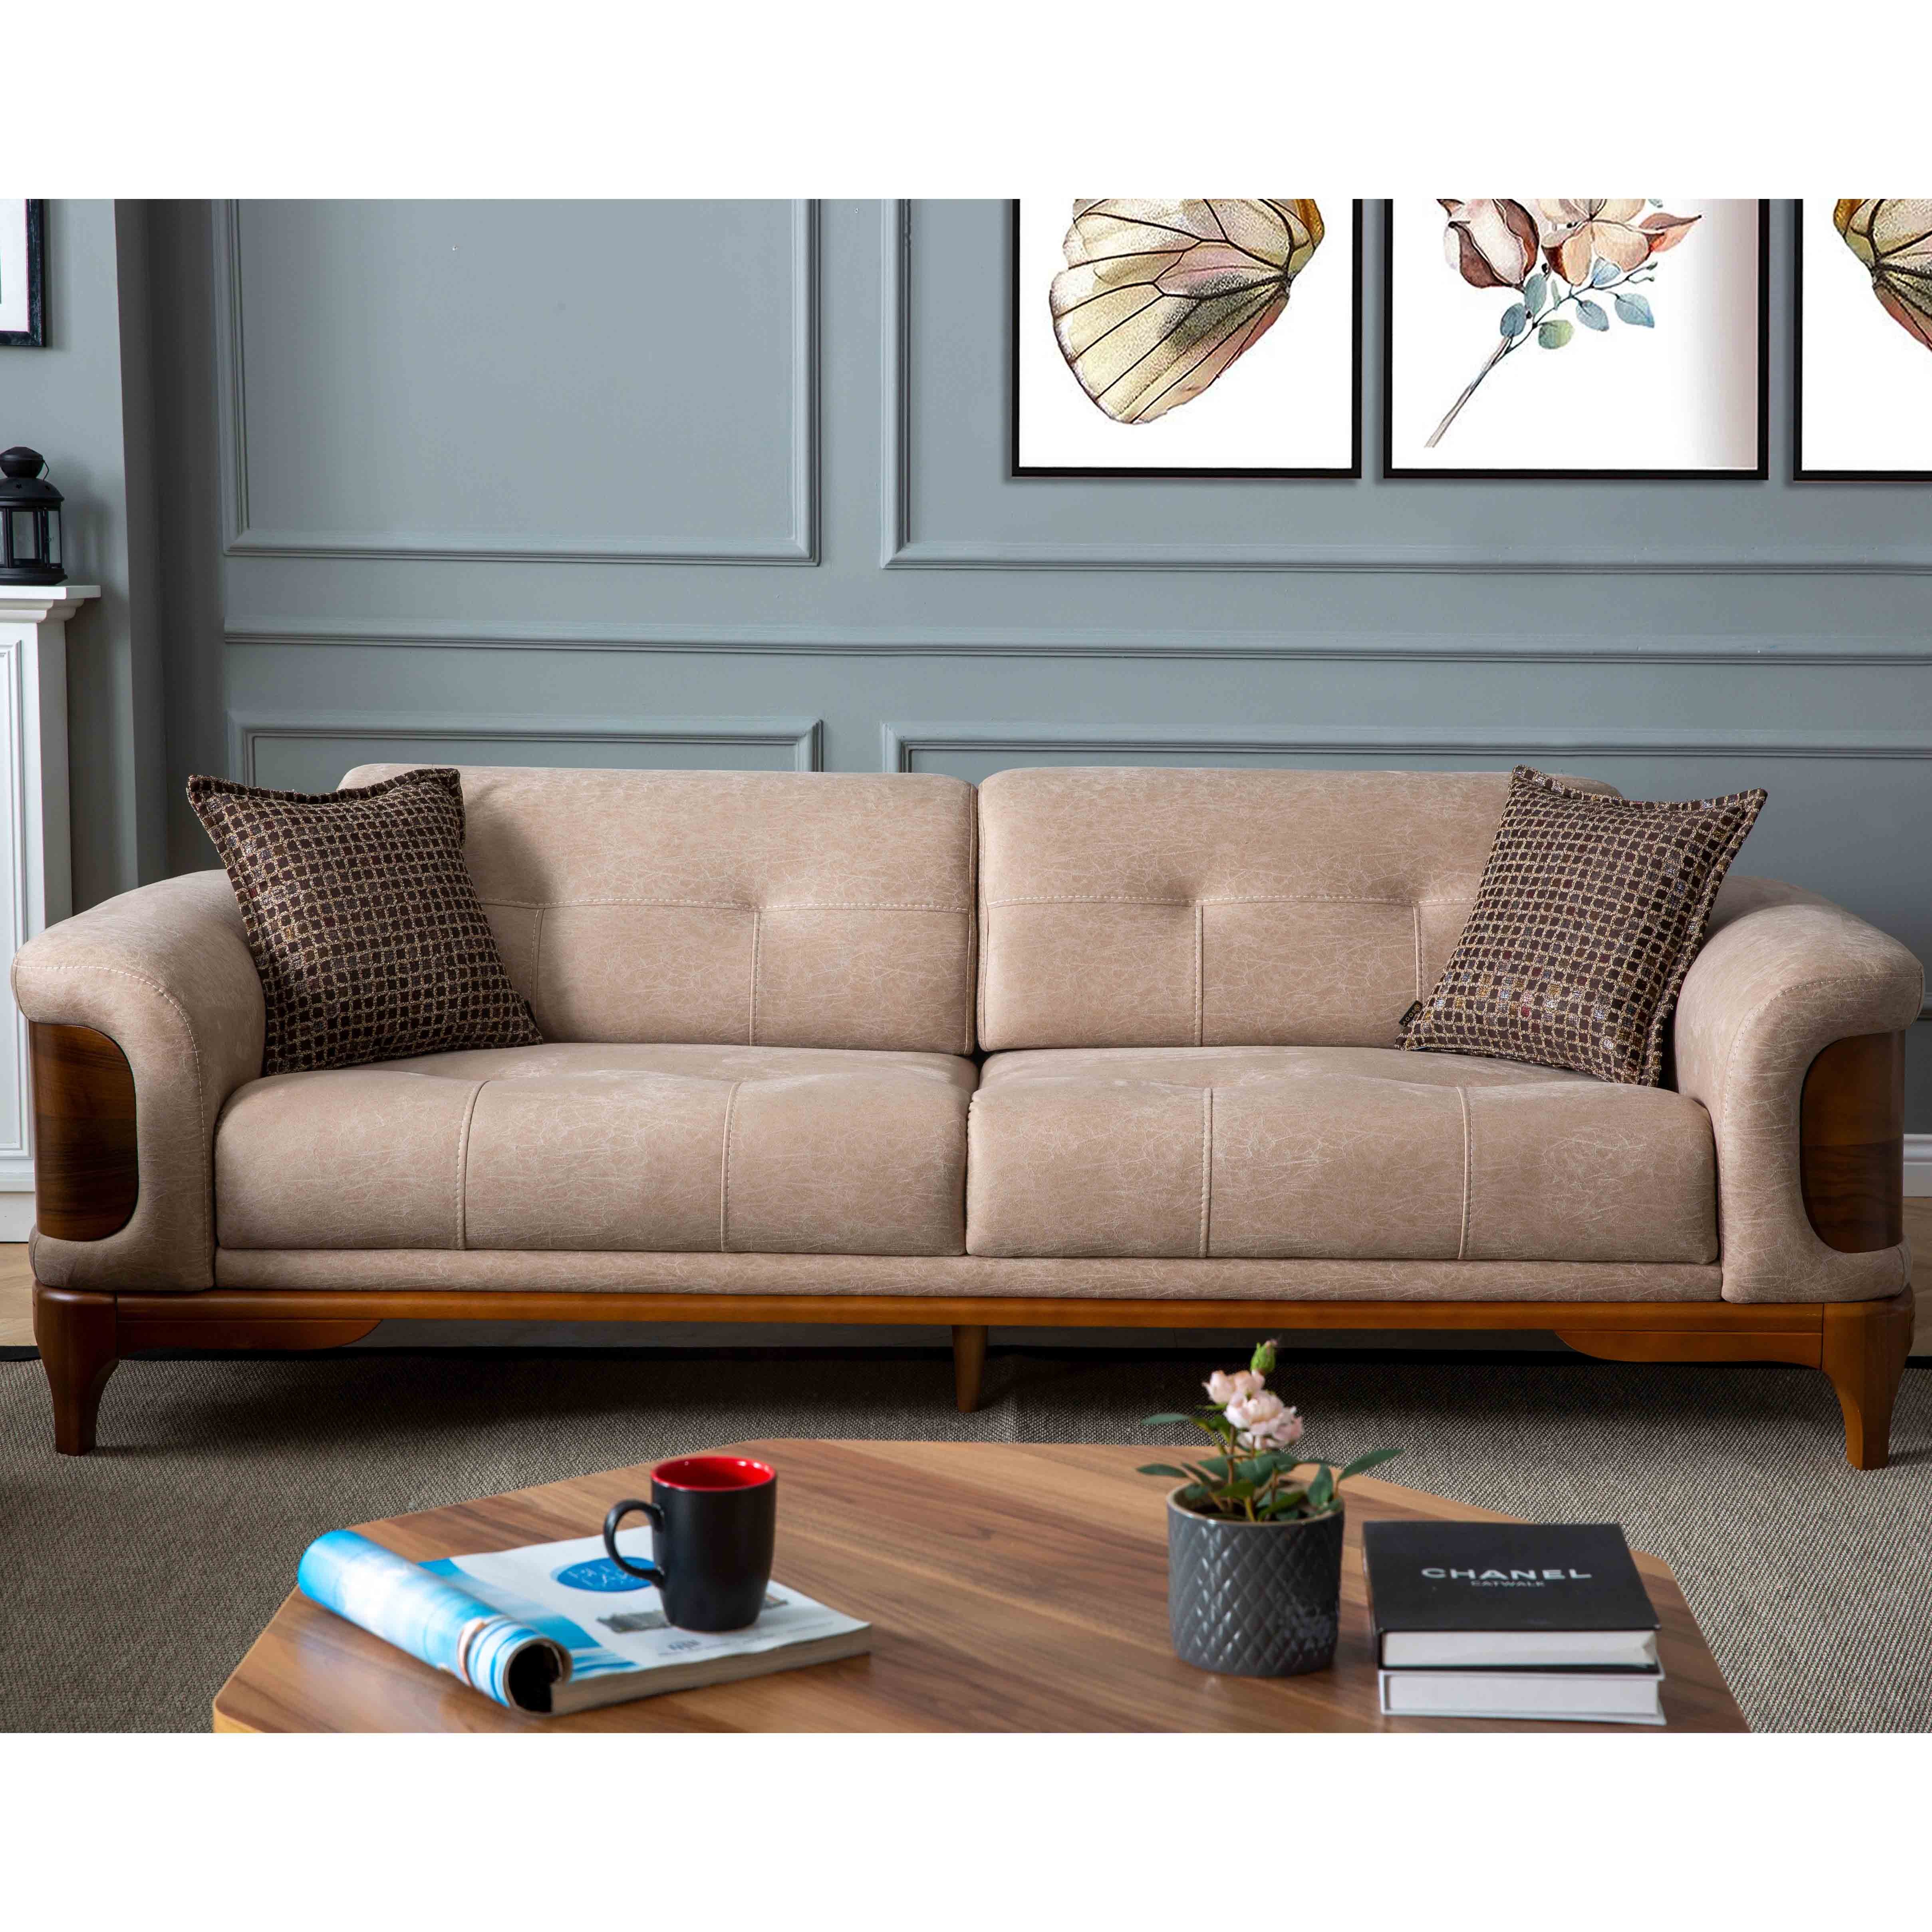 Wood 3 Seater Sofa Bed